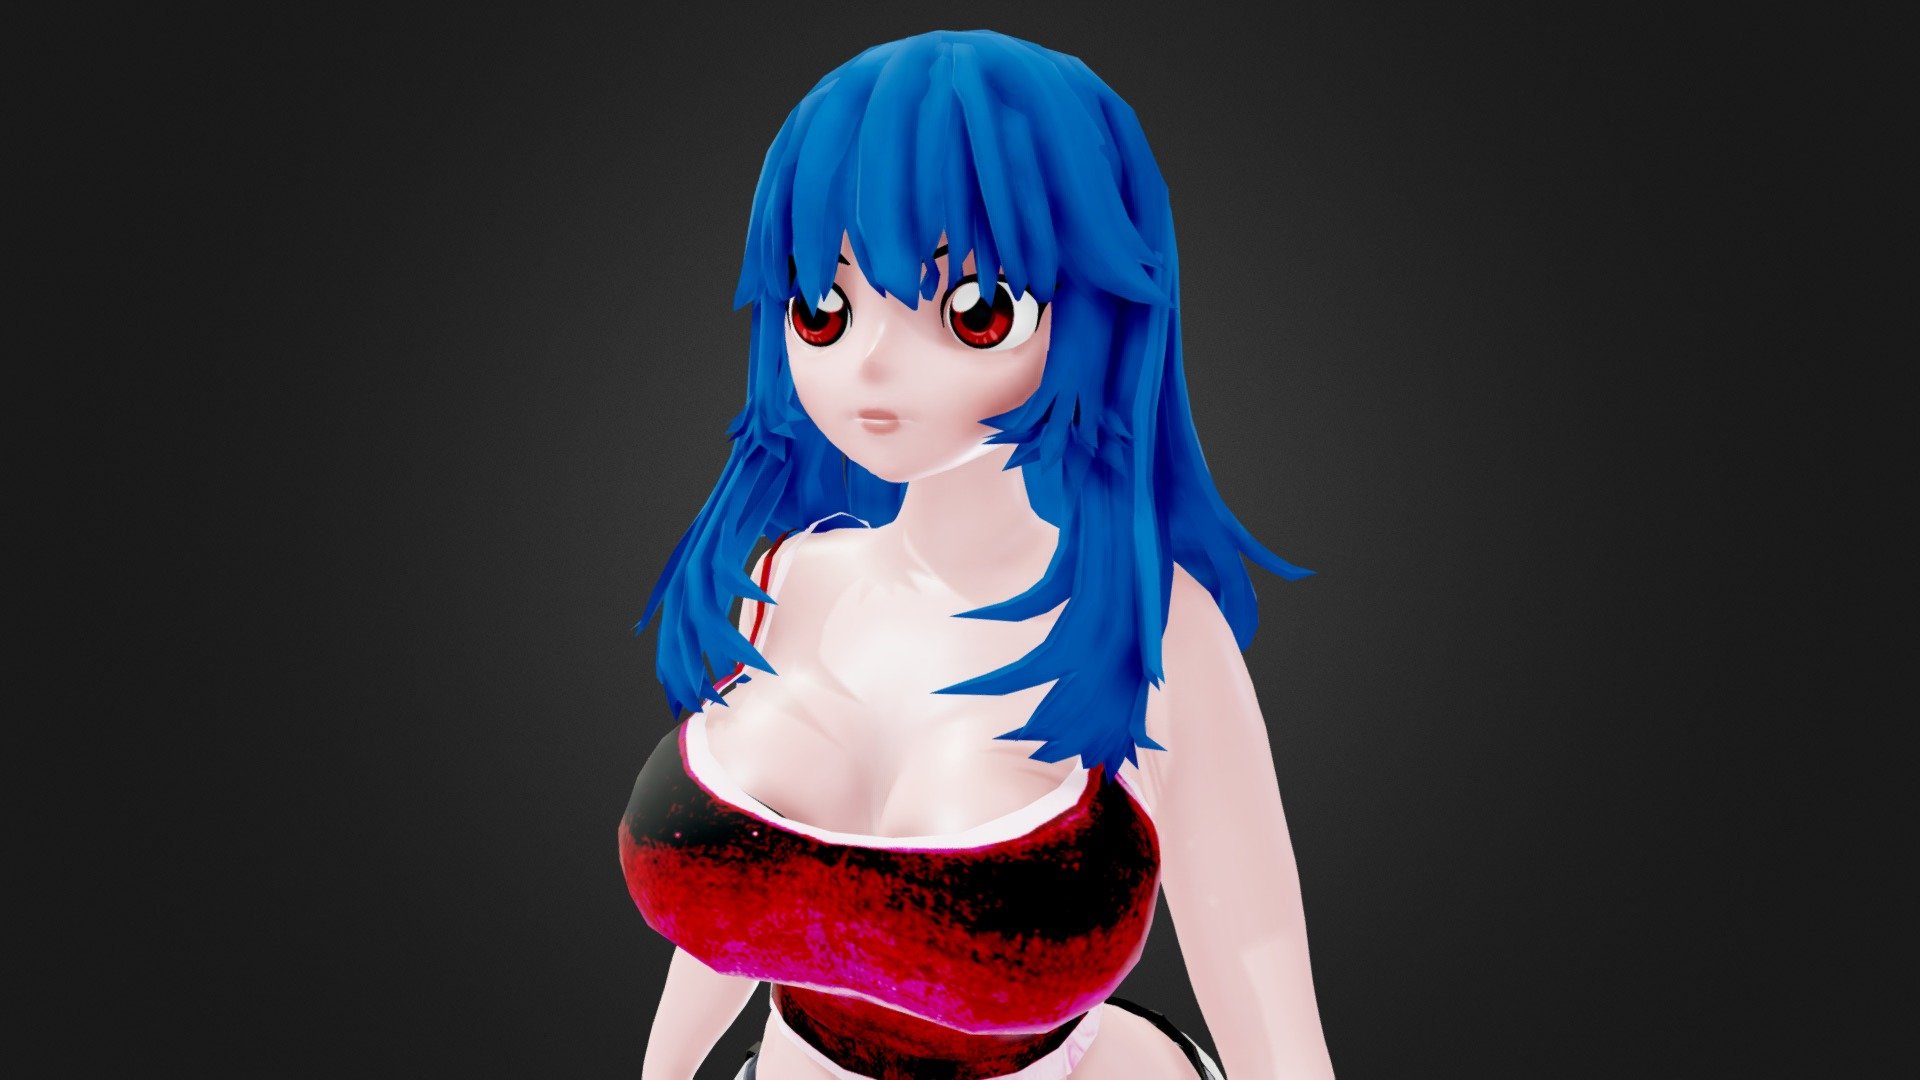 A model I did for commission work.

For commosion requests reach me at:
diversityfields@gmail.com - Commission Work - 3D model by Donte_Loves_Art 3d model